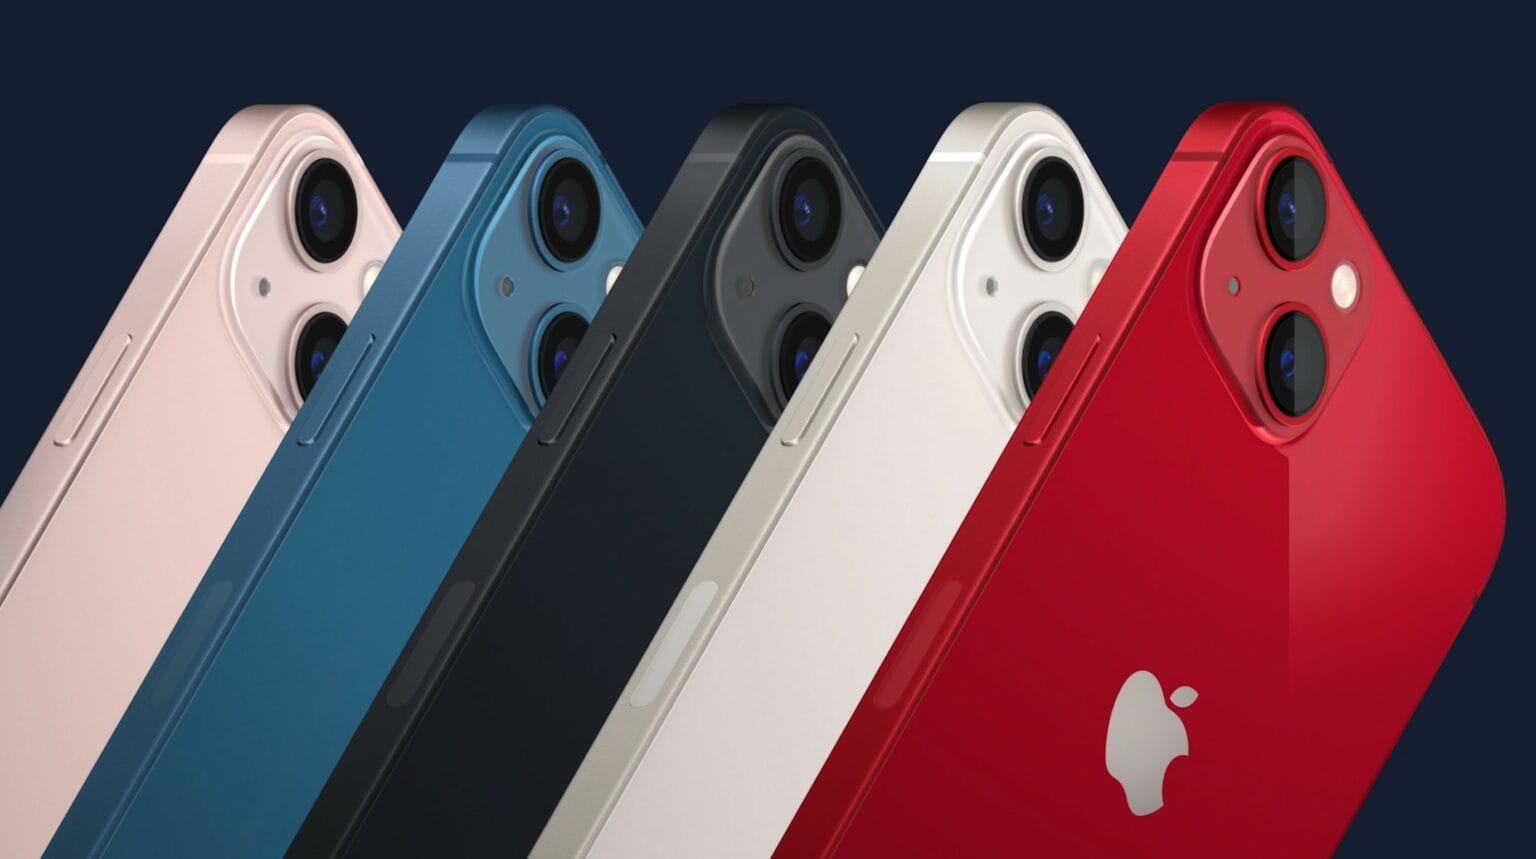 Apple California Streaming event: iPhone 13 comes in an array of five colors.